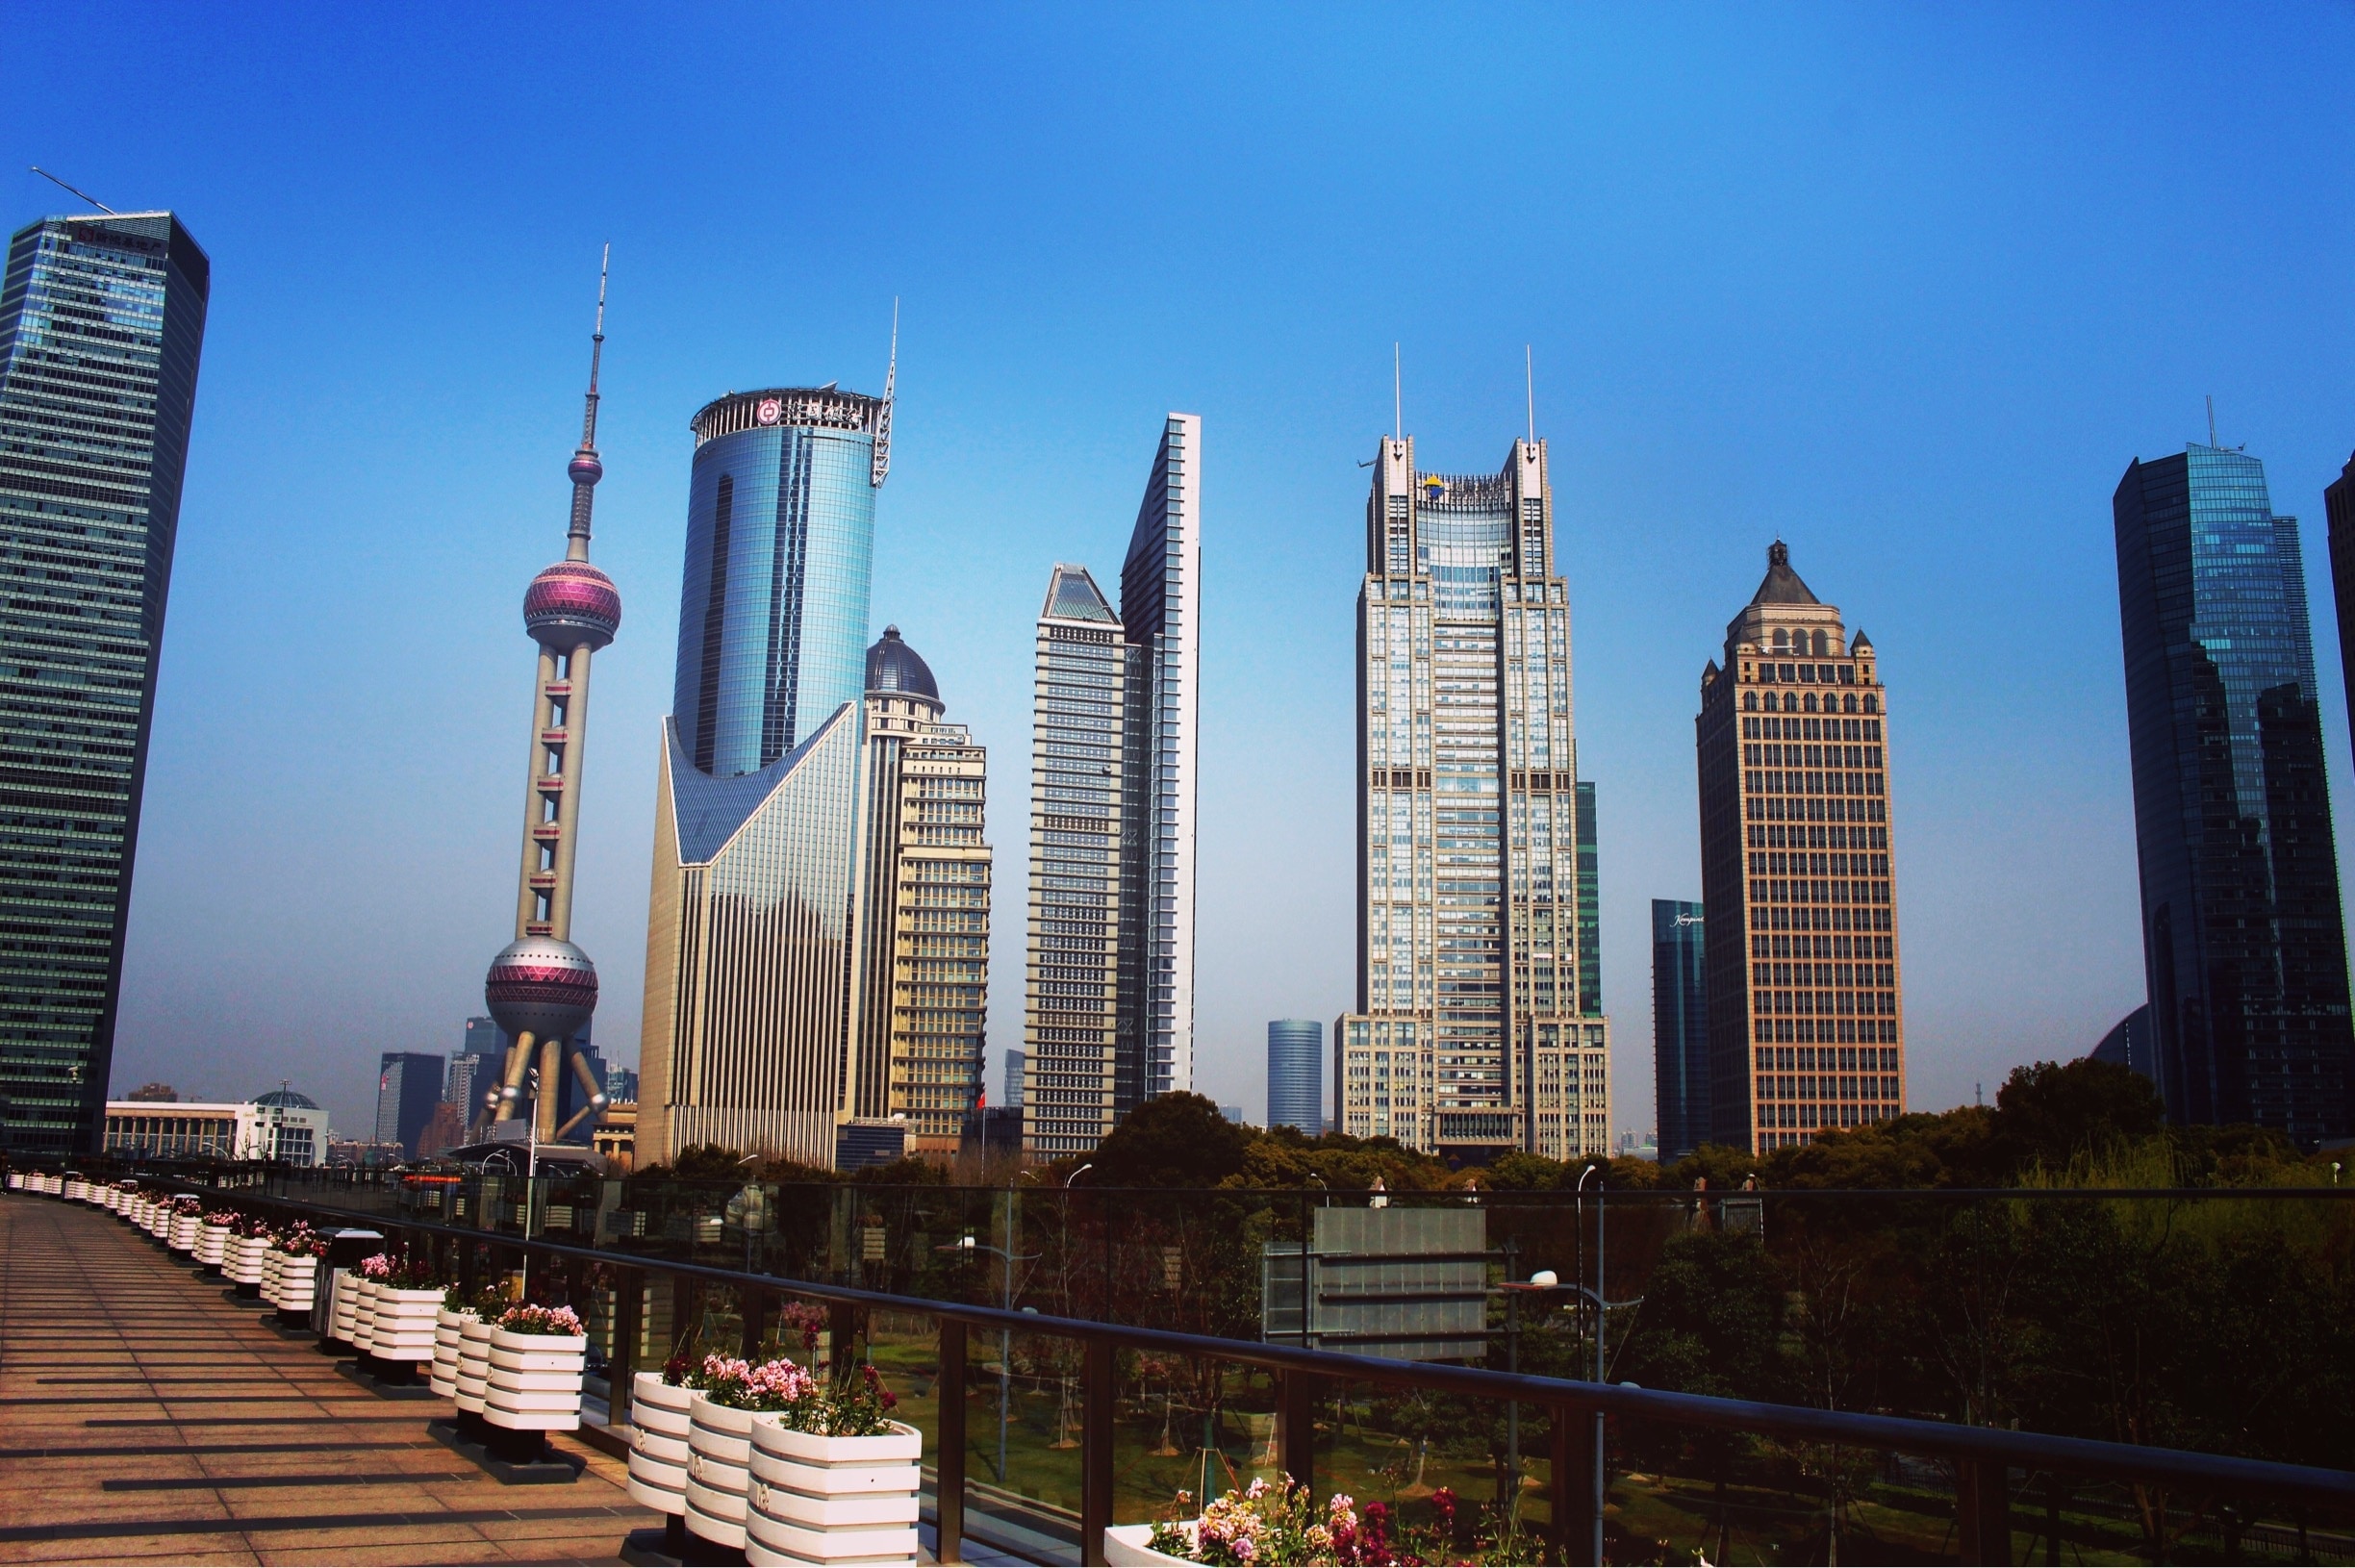 The view of the skyline from the numerous Lujiazui bridges is definitely worth looking at! 